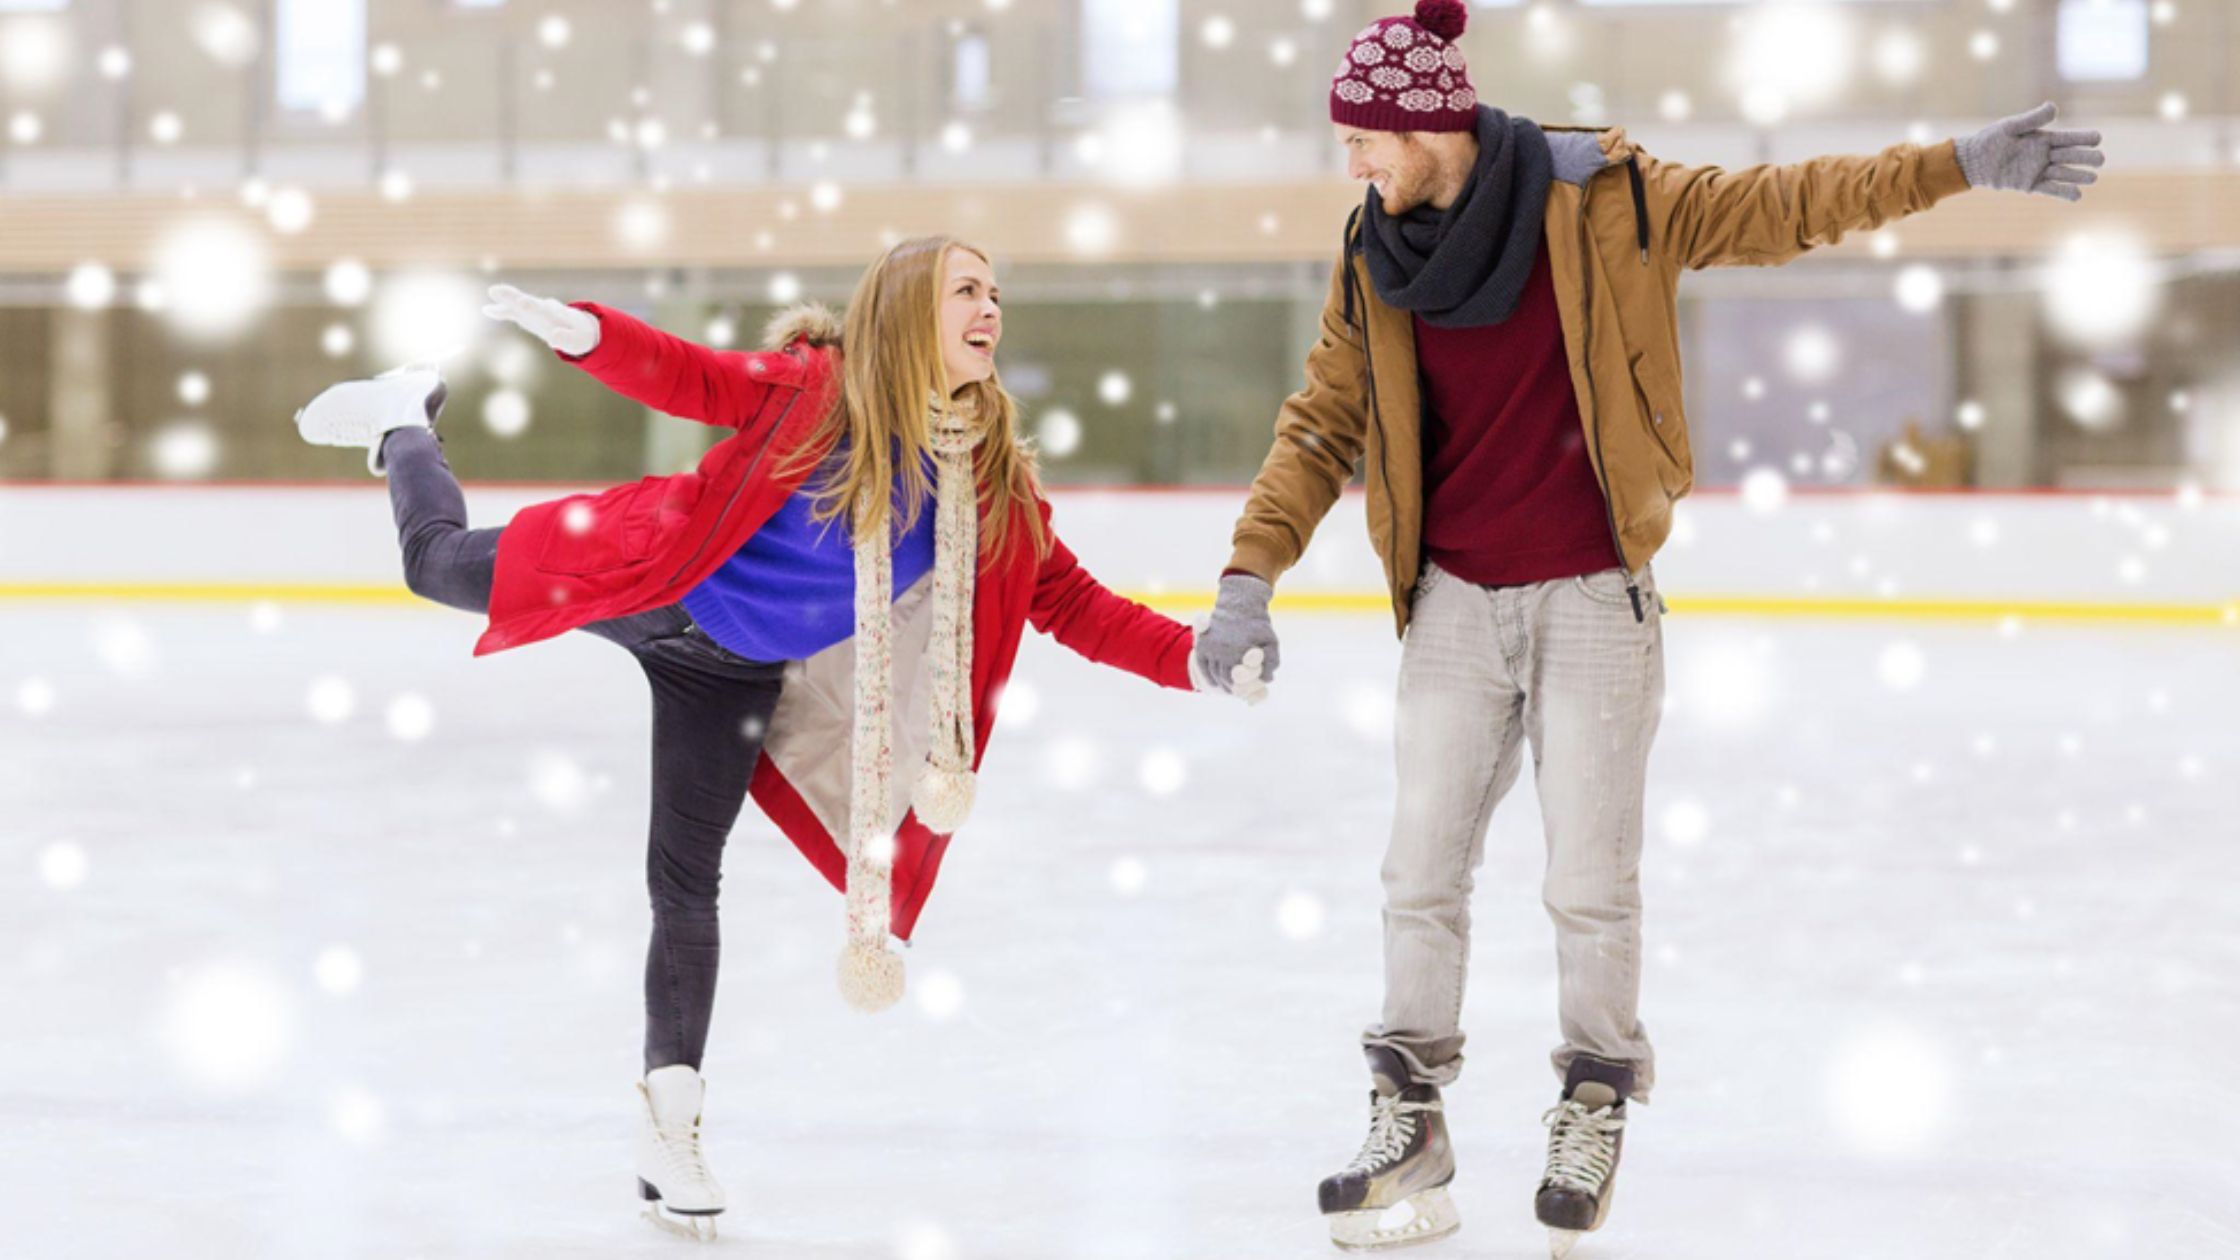 couple ice skating on ice skating rink smiling happy